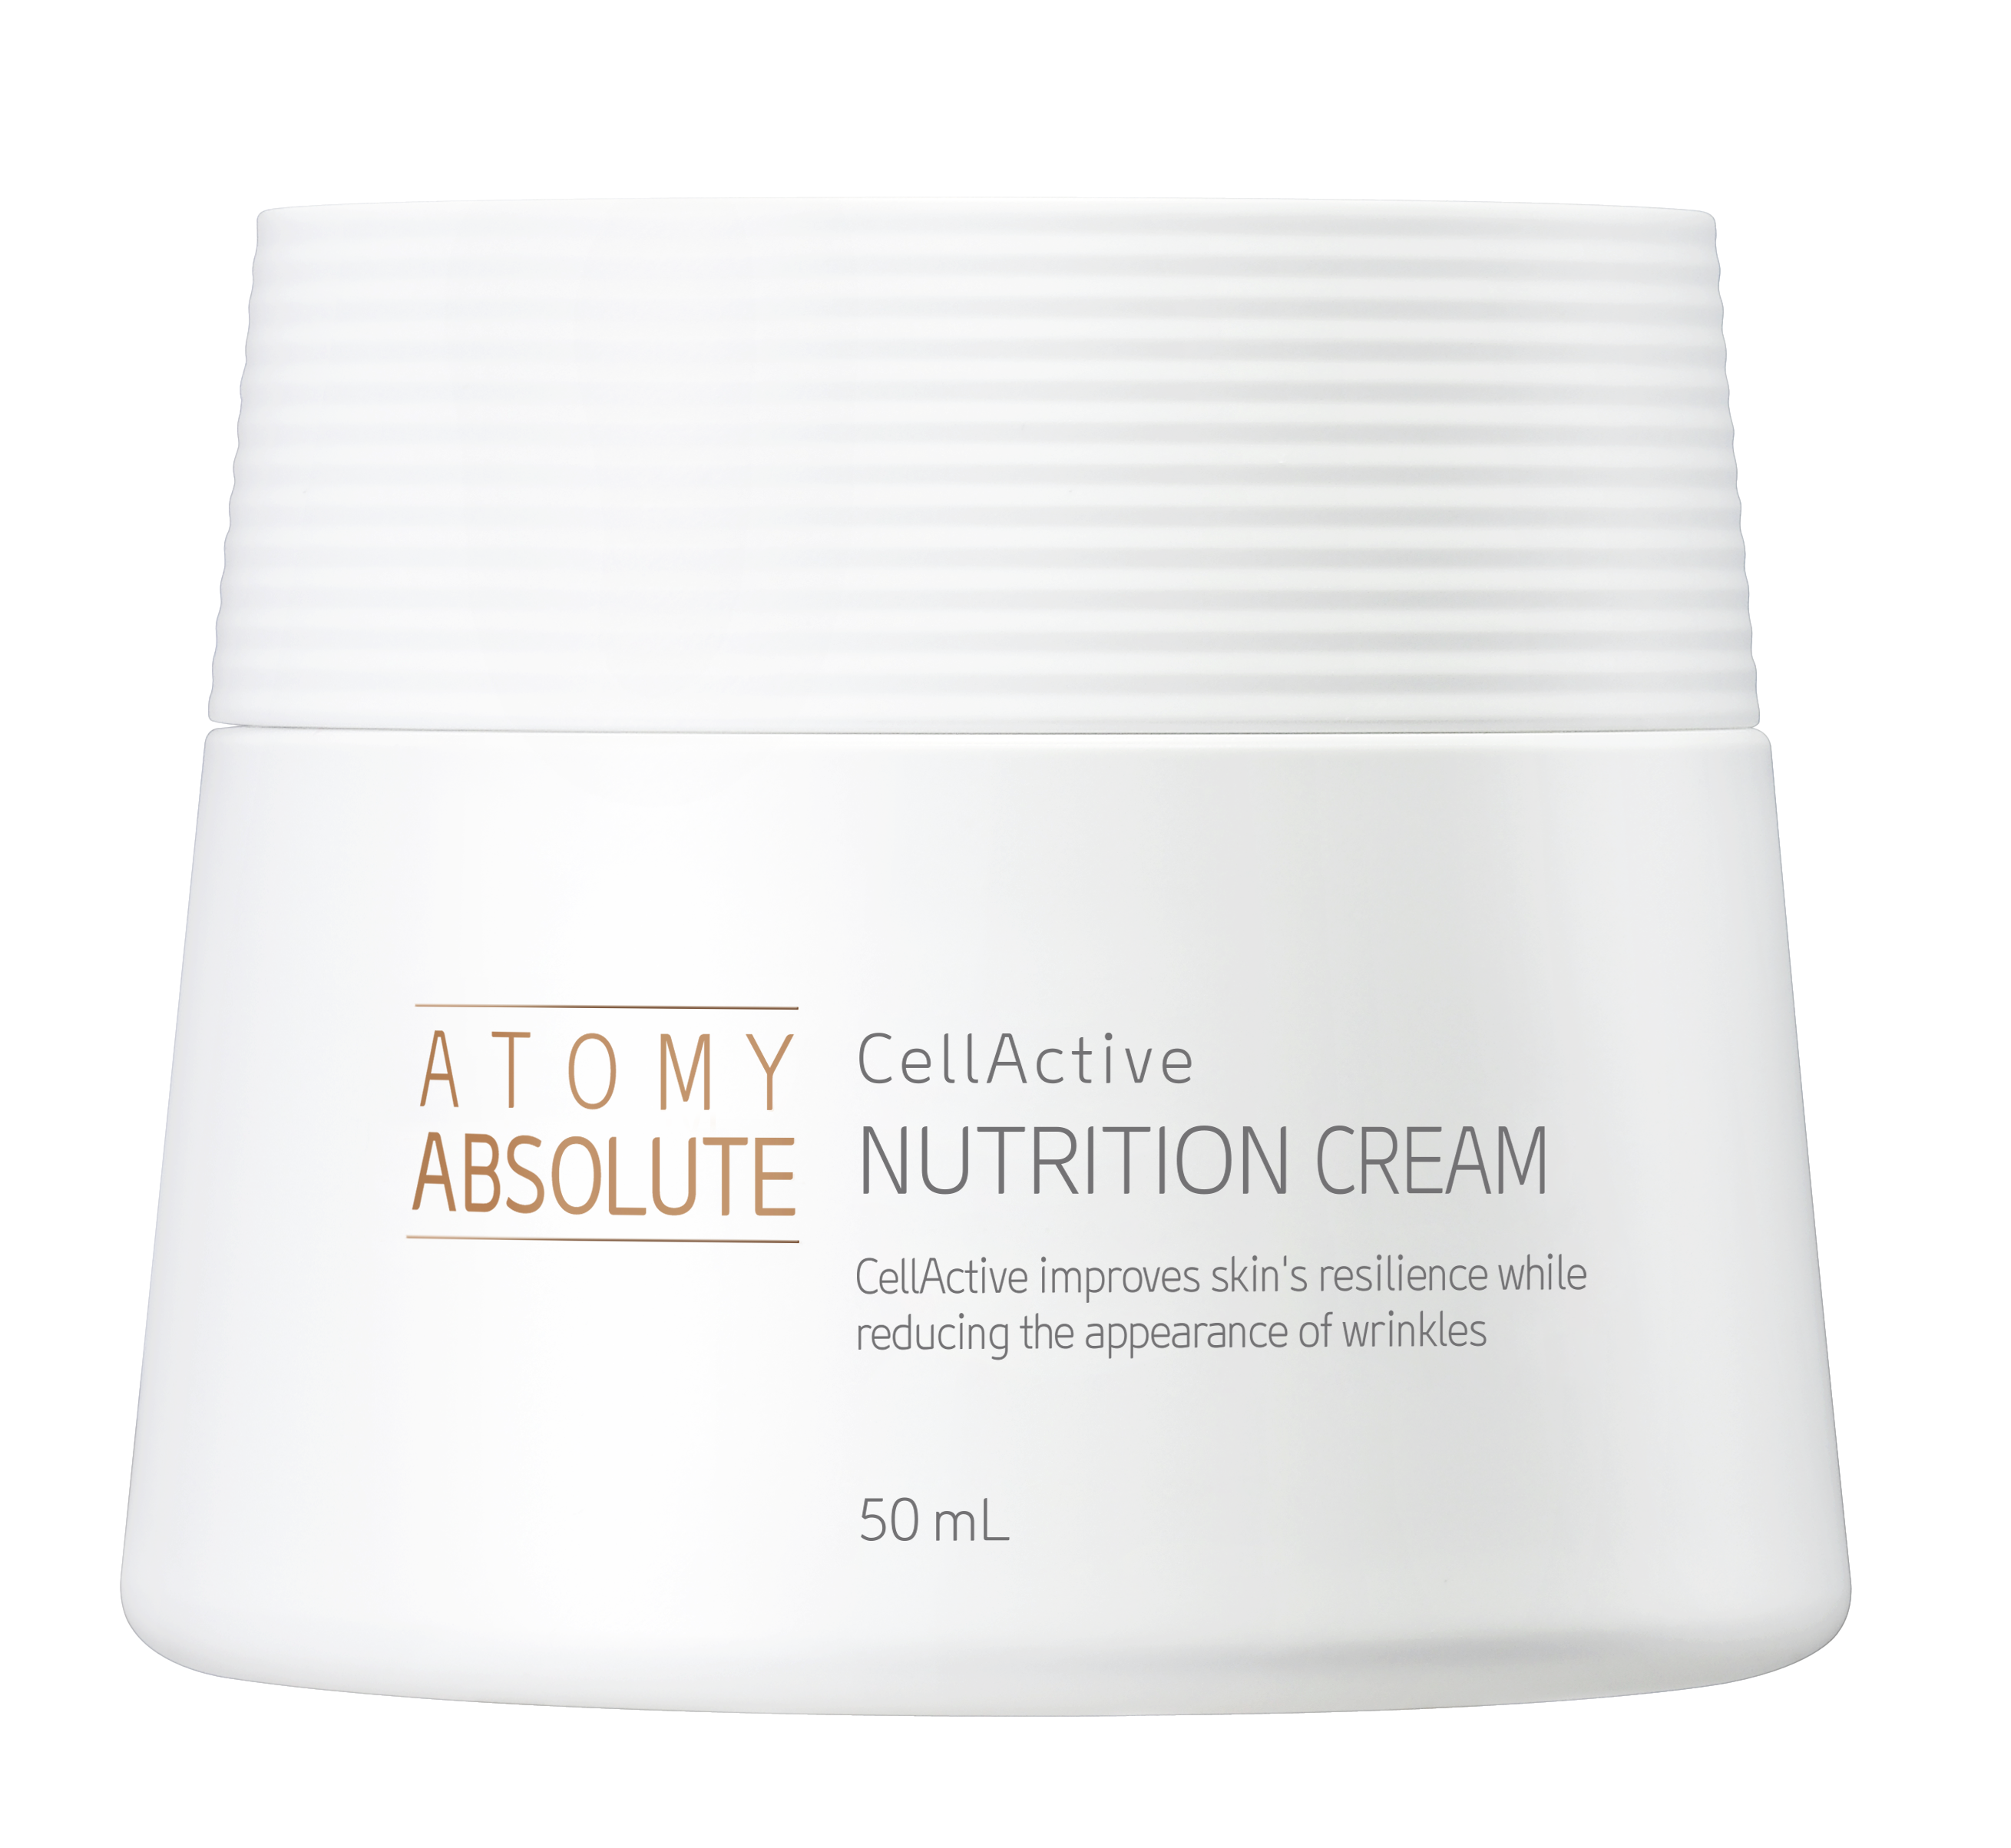 Absolute Nutrition Cream